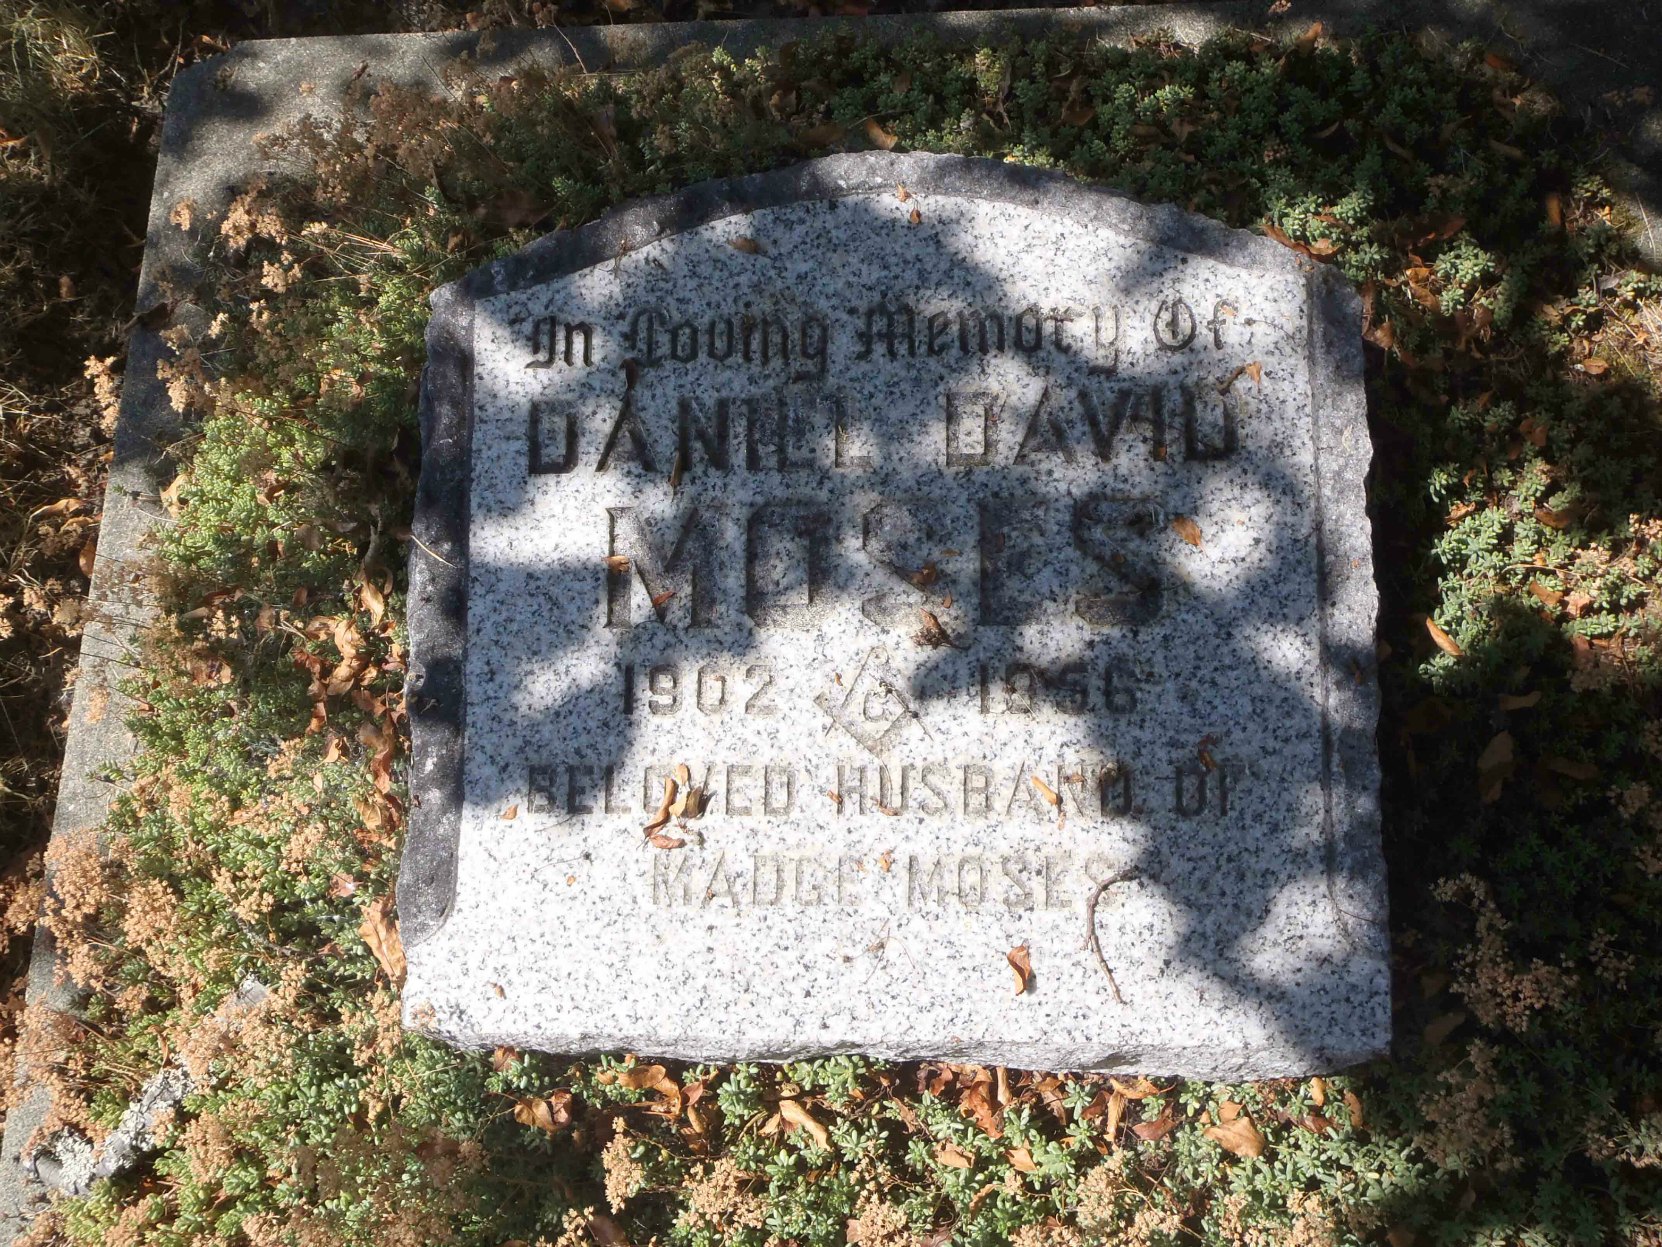 Daniel David Moses grave marker, Holy Trinity Anglican cemetery, North Saanich, B.C.